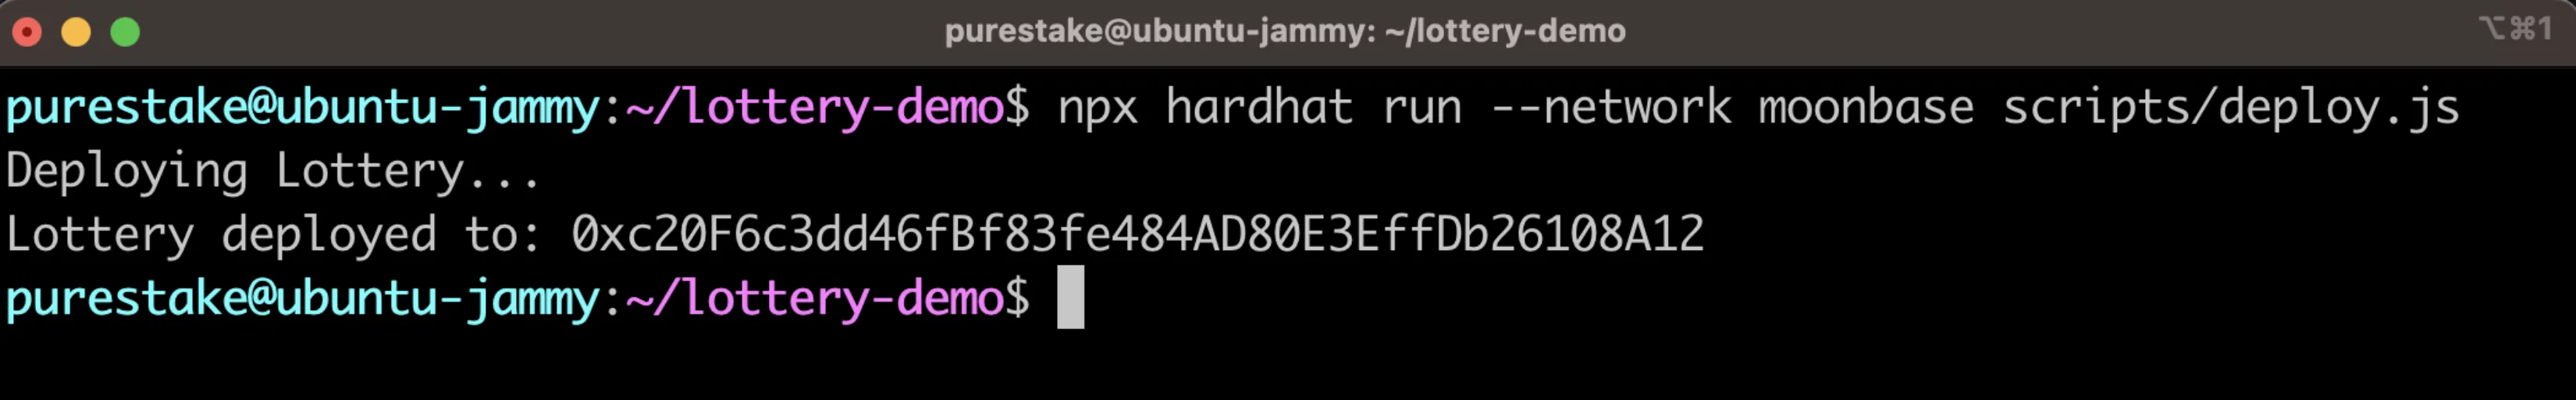 Deploy the Lottery contract using Hardhat's run command.